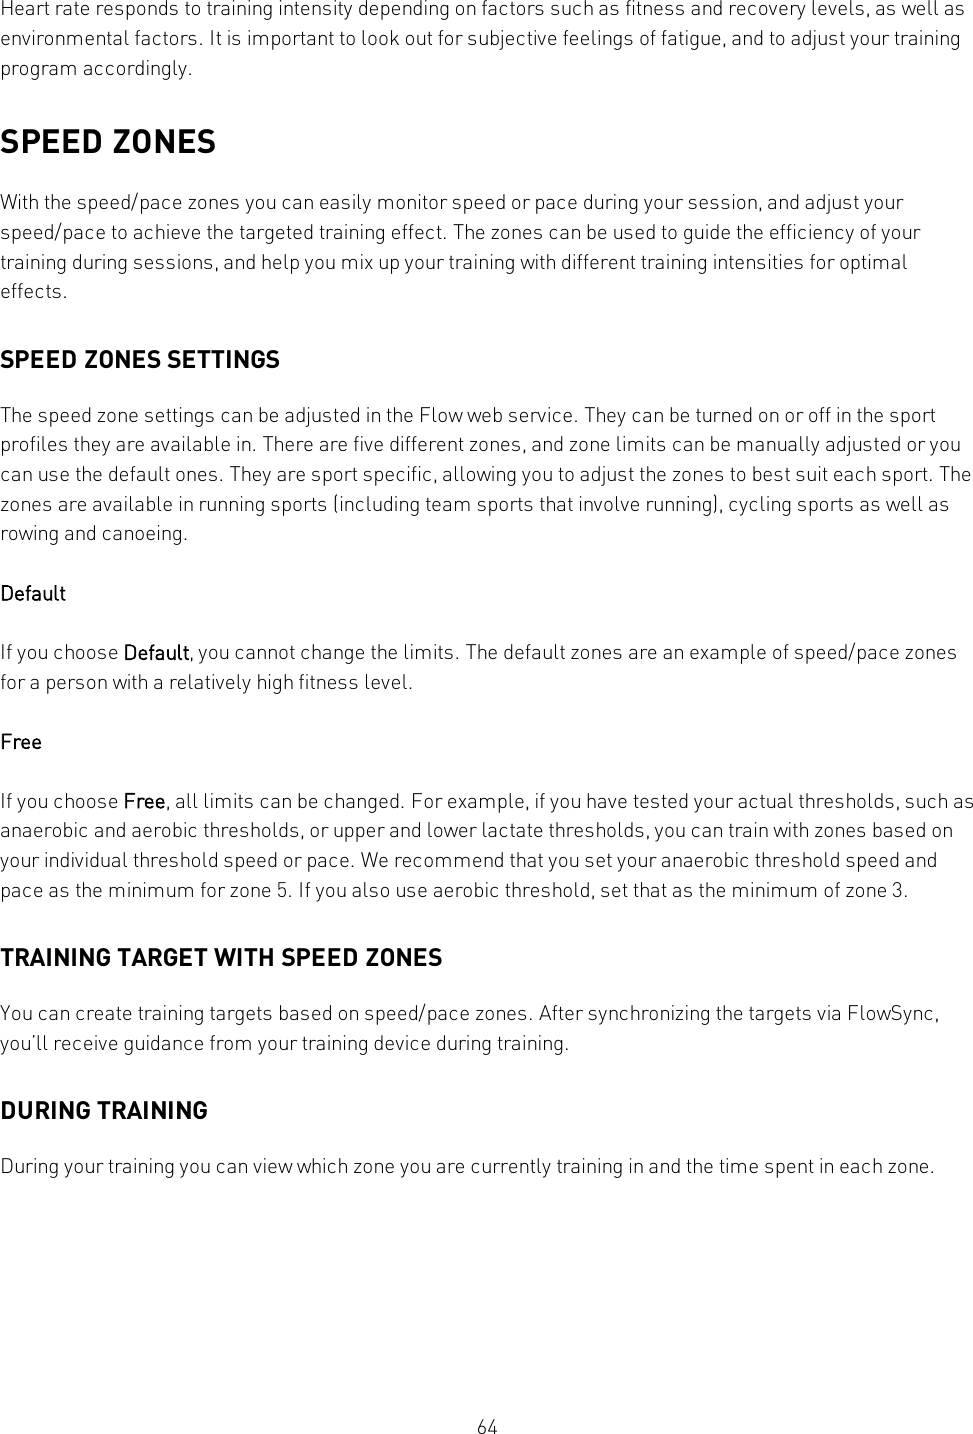 64Heart rate responds to training intensity depending on factors such as fitness and recovery levels, as well asenvironmental factors. It is important to look out for subjective feelings of fatigue, and to adjust your trainingprogram accordingly.SPEED ZONESWith the speed/pace zones you can easily monitor speed or pace during your session, and adjust yourspeed/pace to achieve the targeted training effect. The zones can be used to guide the efficiency of yourtraining during sessions, and help you mix up your training with different training intensities for optimaleffects.SPEED ZONES SETTINGSThe speed zone settings can be adjusted in the Flow web service. They can be turned on or off in the sportprofiles they are available in. There are five different zones, and zone limits can be manually adjusted or youcan use the default ones. They are sport specific, allowing you to adjust the zones to best suit each sport. Thezones are available in running sports (including team sports that involve running), cycling sports as well asrowing and canoeing.DefaultIf you choose Default, you cannot change the limits. The default zones are an example of speed/pace zonesfor a person with a relatively high fitness level.FreeIf you choose Free, all limits can be changed. For example, if you have tested your actual thresholds, such asanaerobic and aerobic thresholds, or upper and lower lactate thresholds, you can train with zones based onyour individual threshold speed or pace. We recommend that you set your anaerobic threshold speed andpace as the minimum for zone 5. If you also use aerobic threshold, set that as the minimum of zone 3.TRAINING TARGET WITH SPEED ZONESYou can create training targets based on speed/pace zones. After synchronizing the targets via FlowSync,you’ll receive guidance from your training device during training.DURING TRAININGDuring your training you can view which zone you are currently training in and the time spent in each zone.